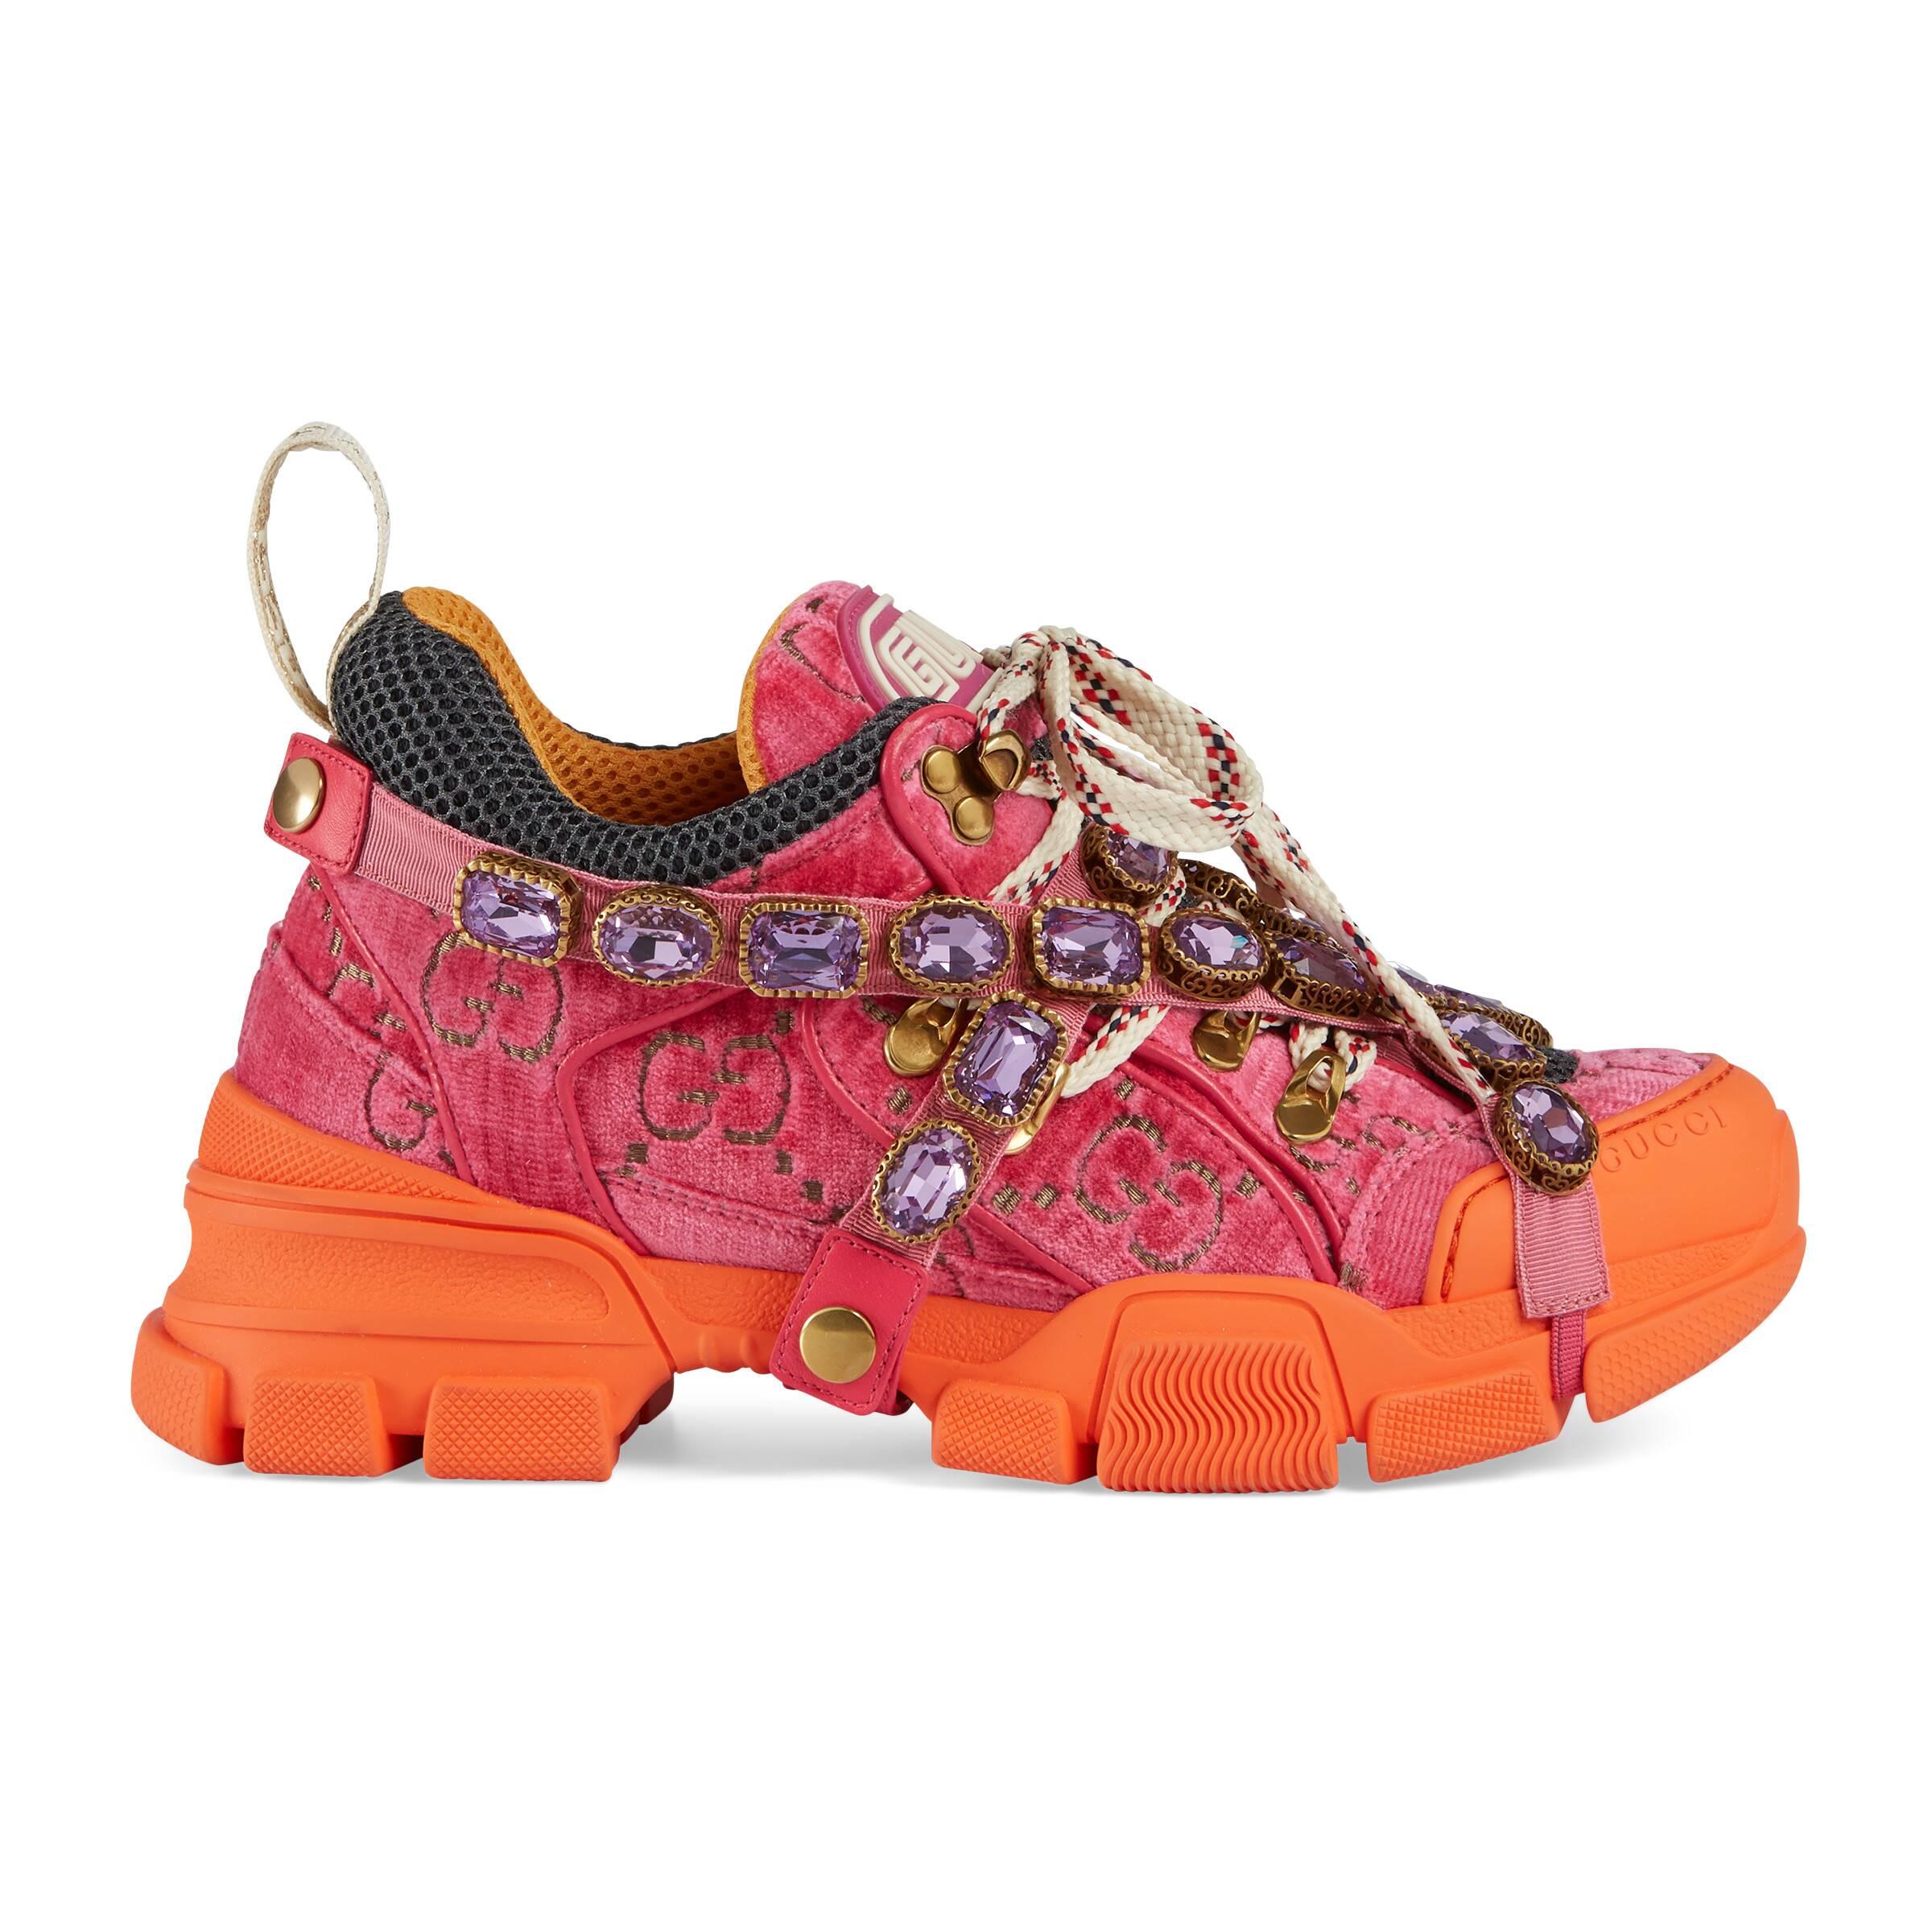 Gucci Flashtrek Sneaker With Crystals in Orange | Lyst